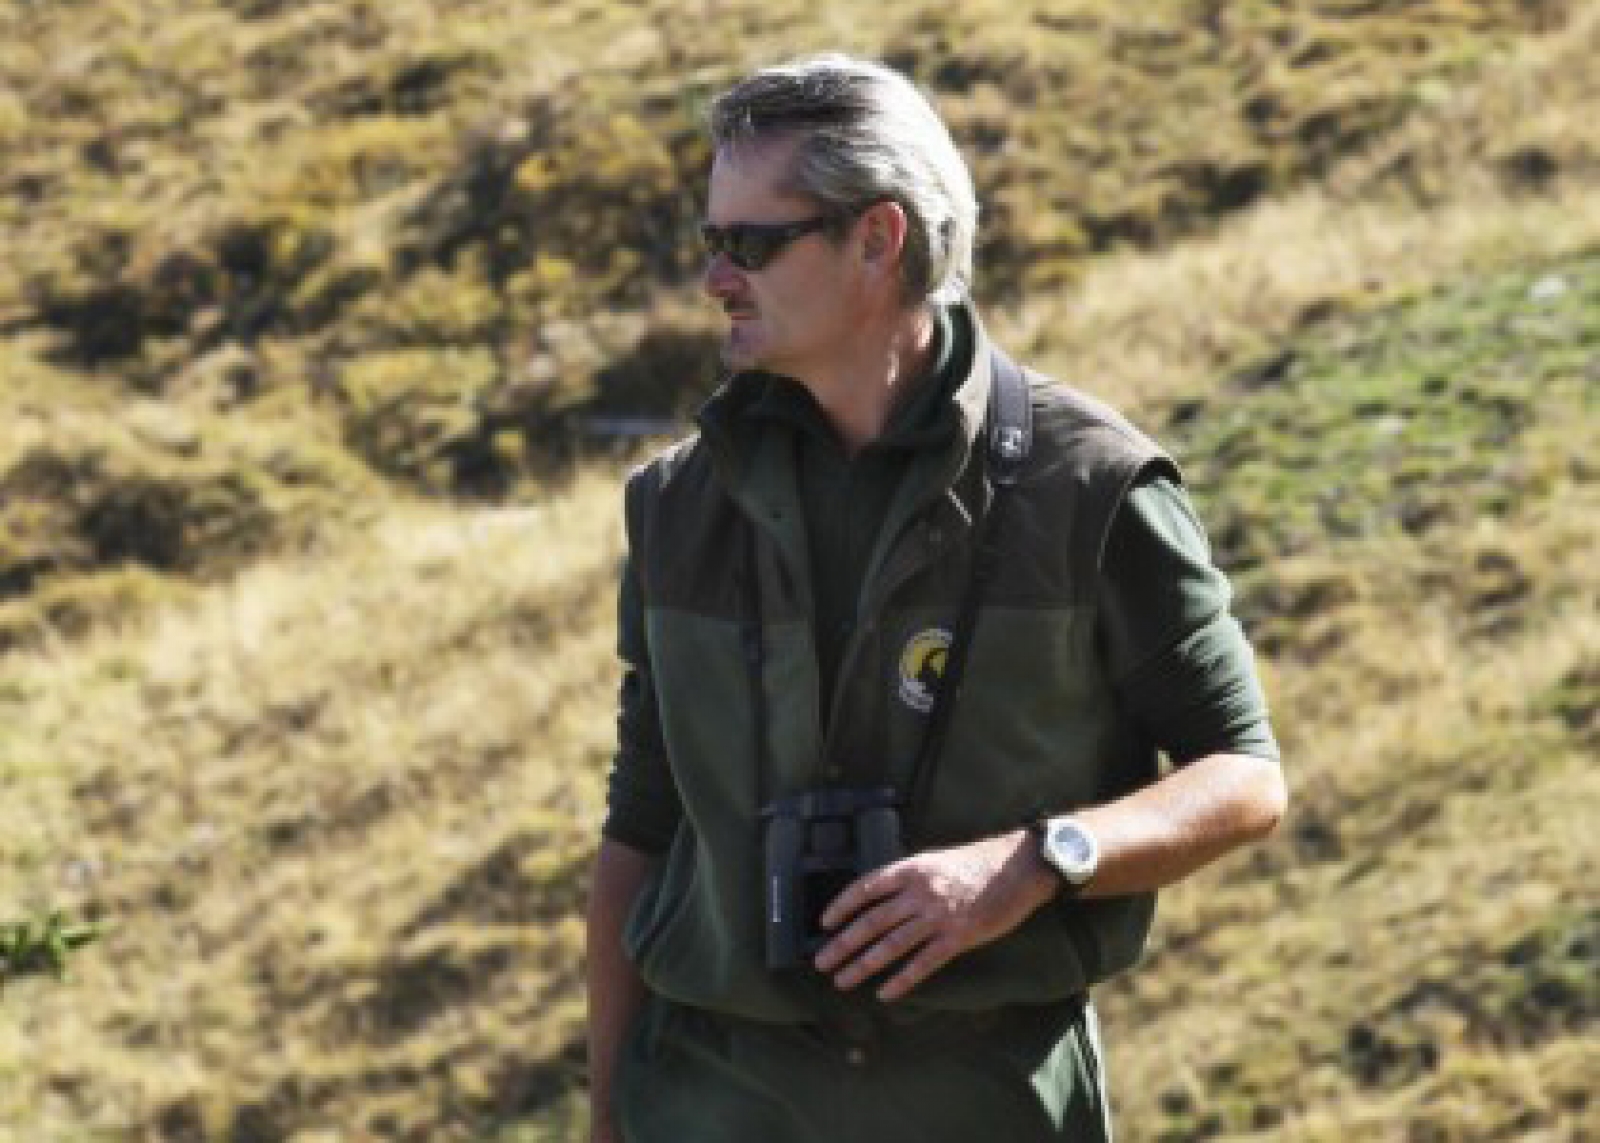 A new director for the Gran Paradiso National Park